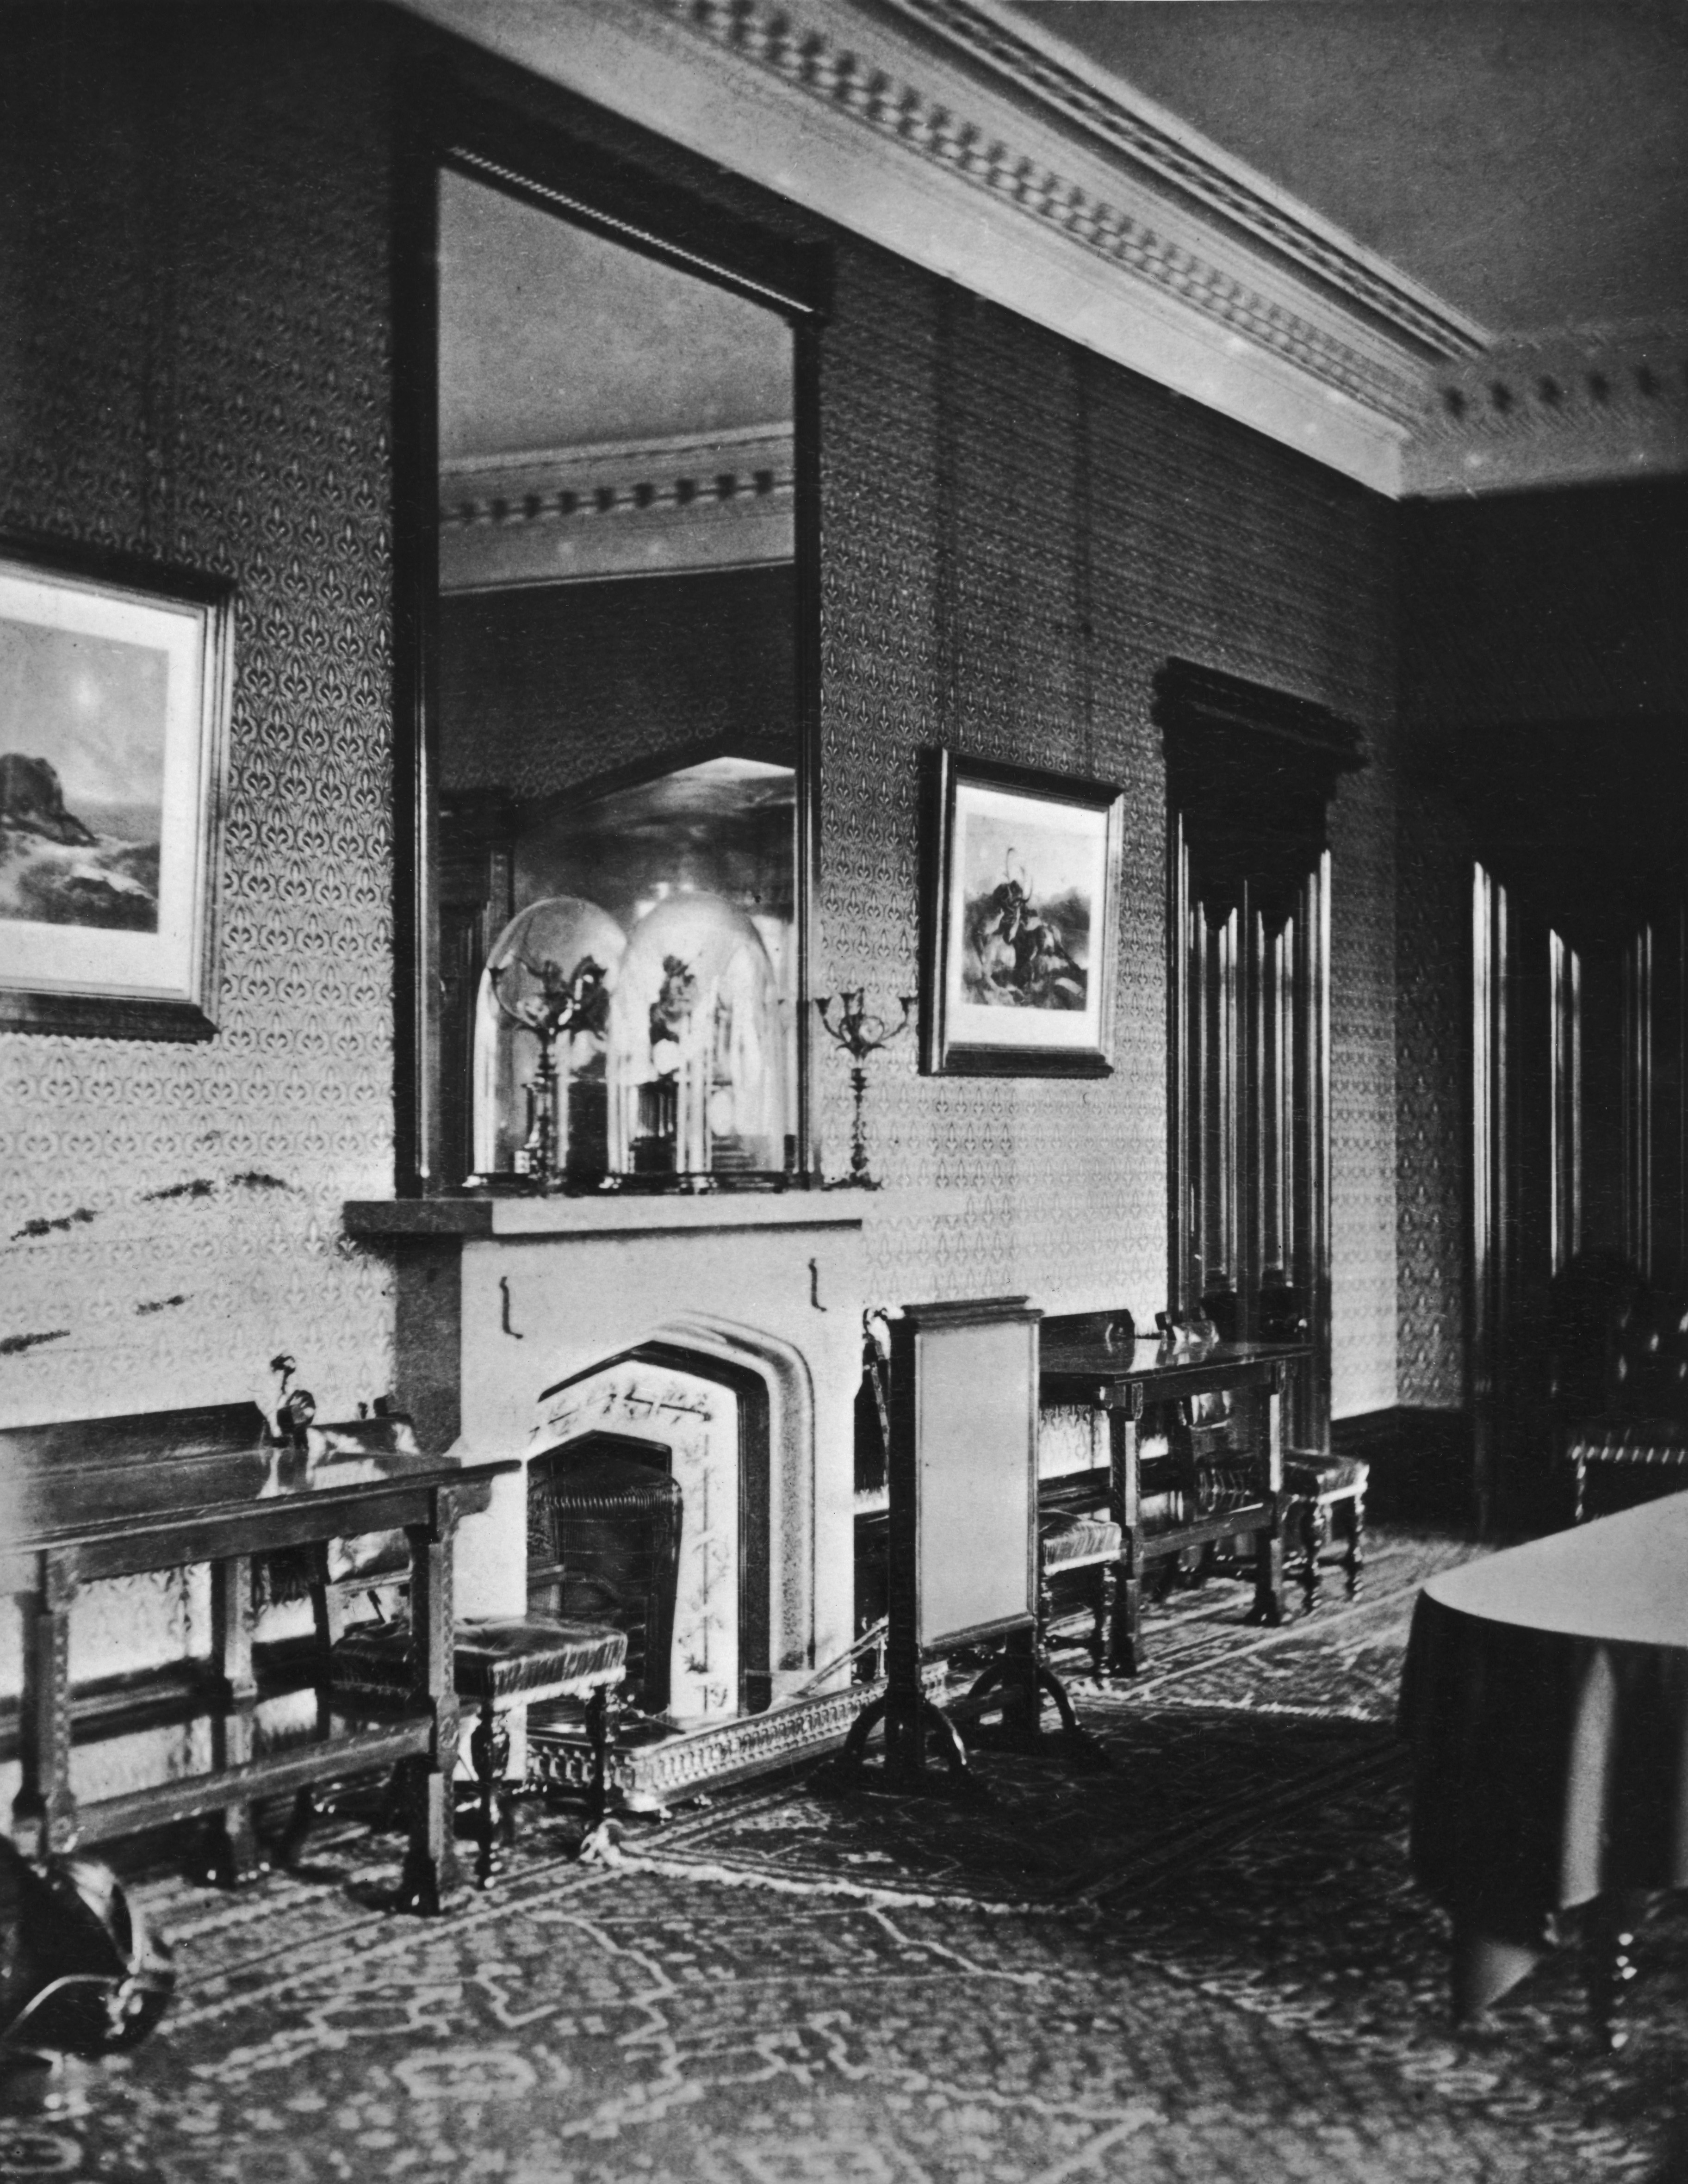 The dining room at Queen Victoria's royal residence at Balmoral Castle, Aberdeenshire, Scotland, circa 1870 | Source: Getty Images